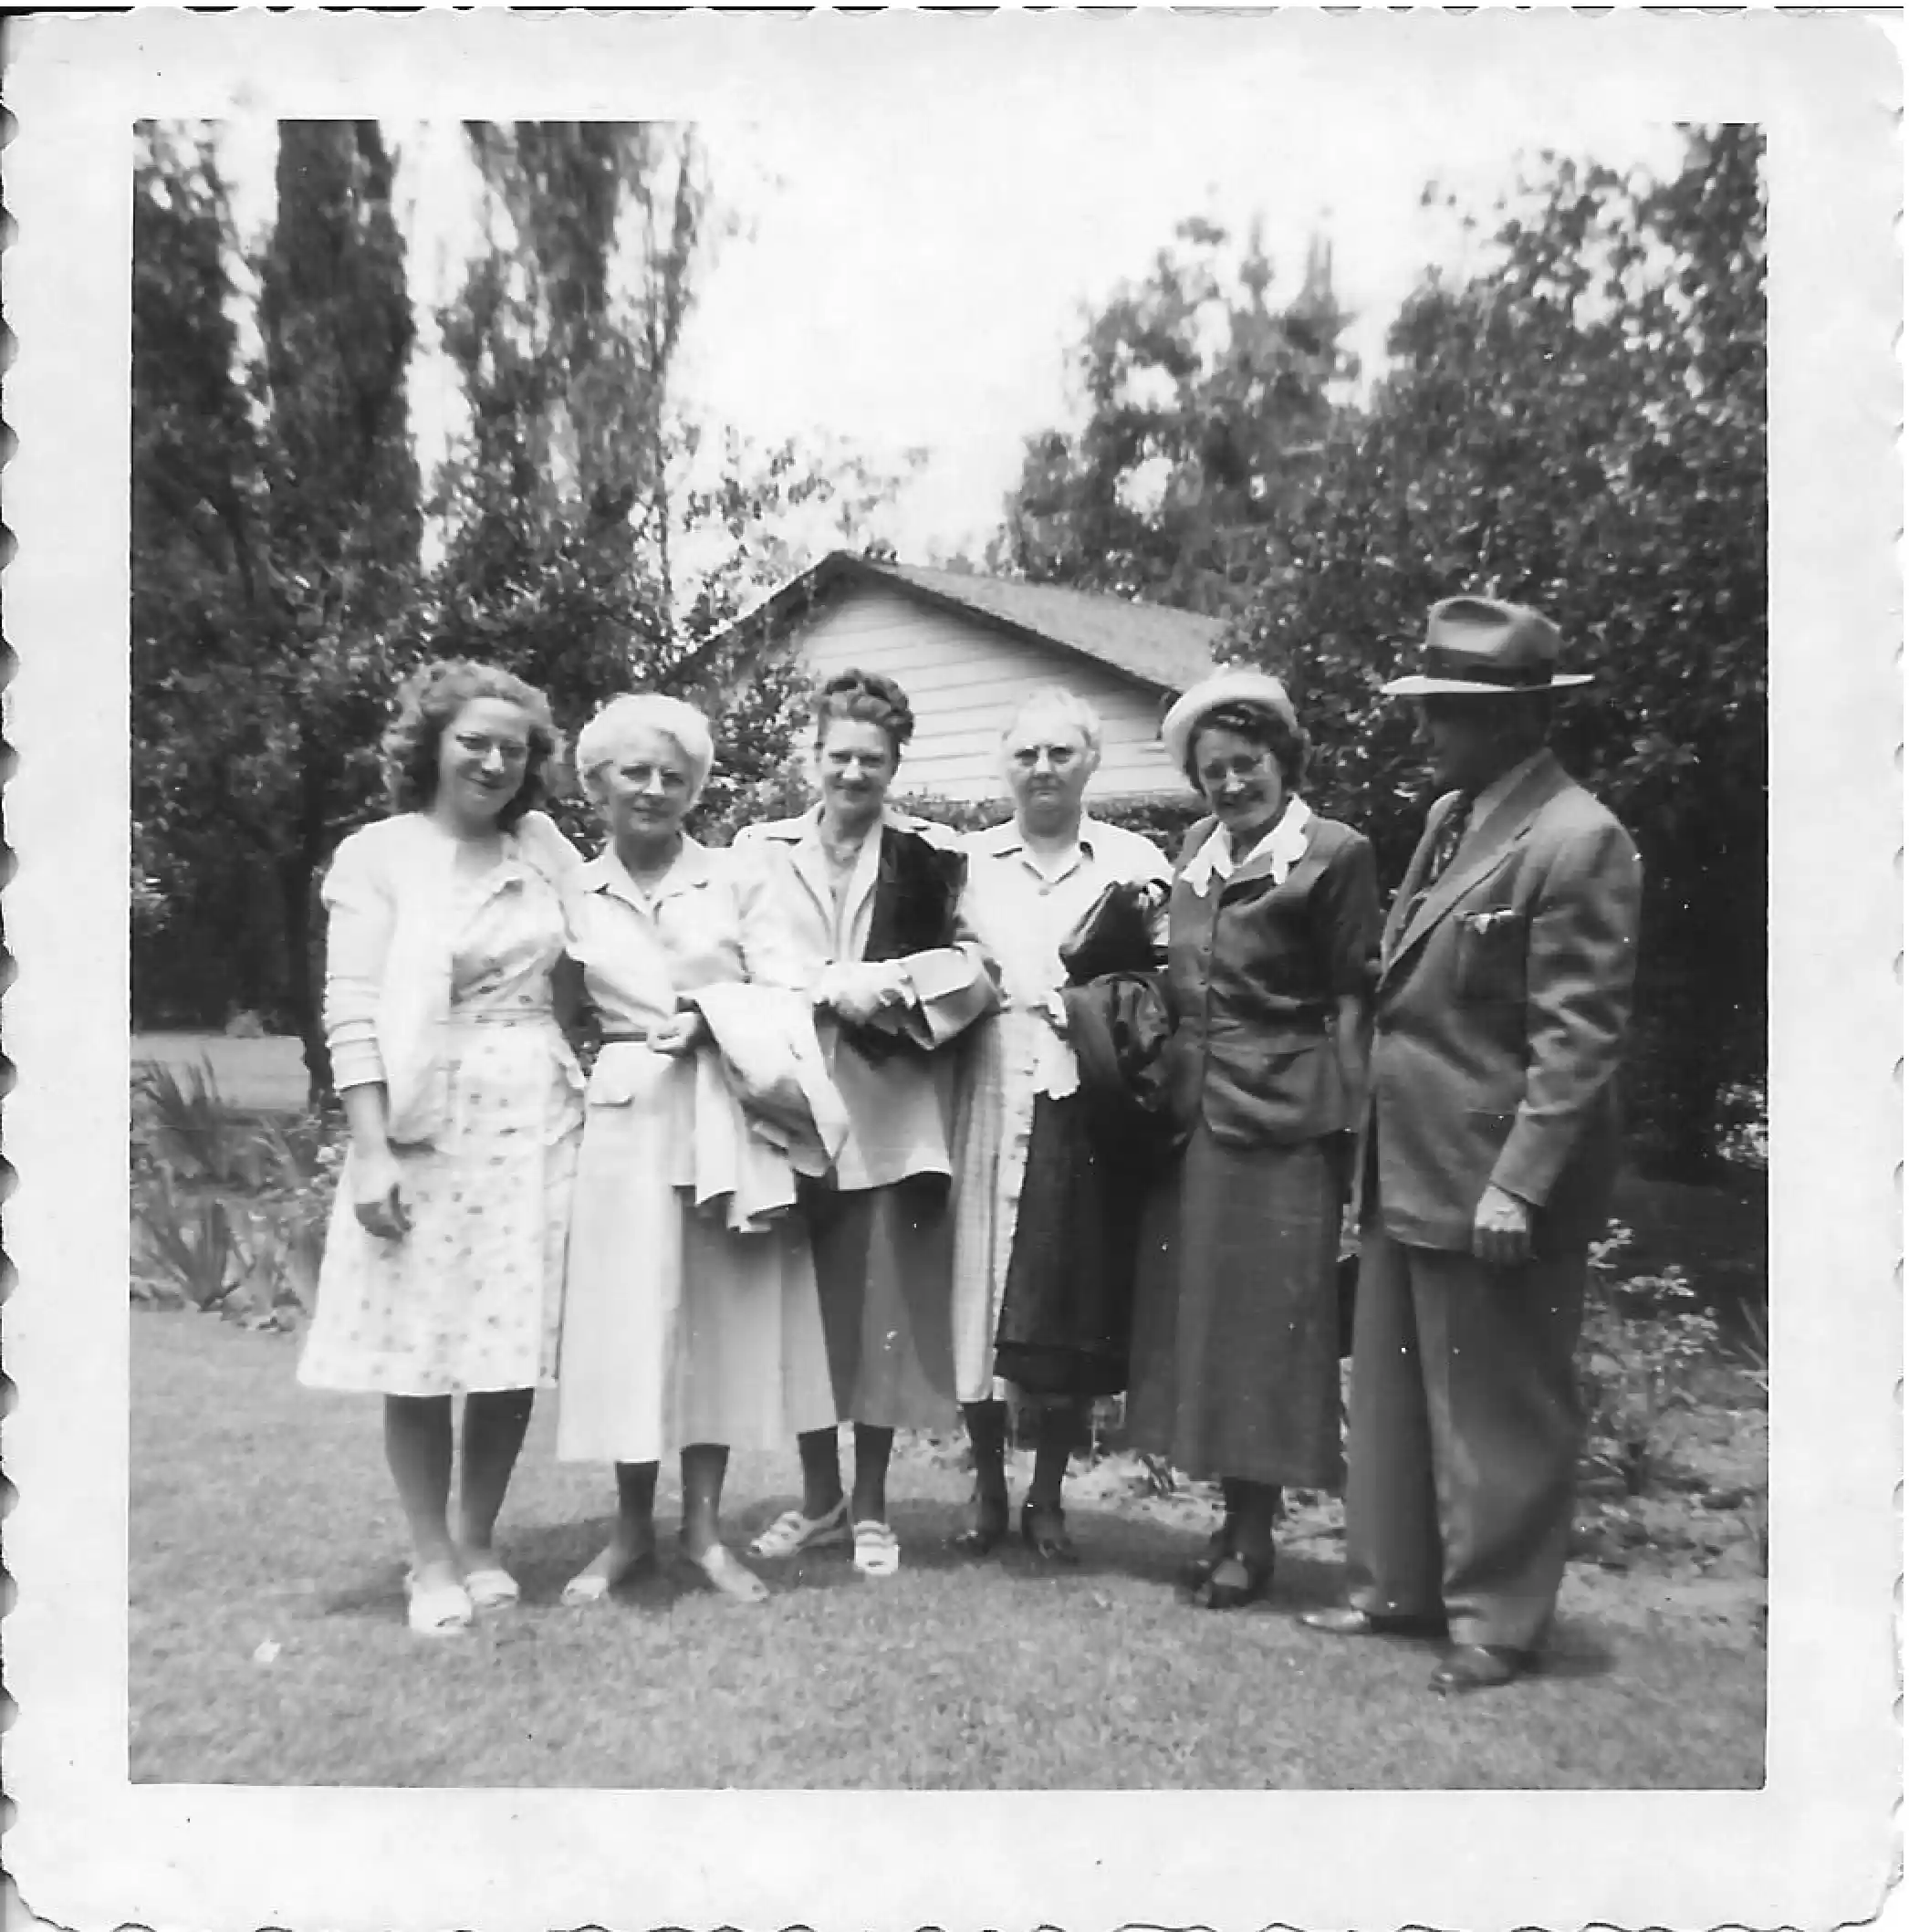 Early members with the Armstrongs (c1948-50)